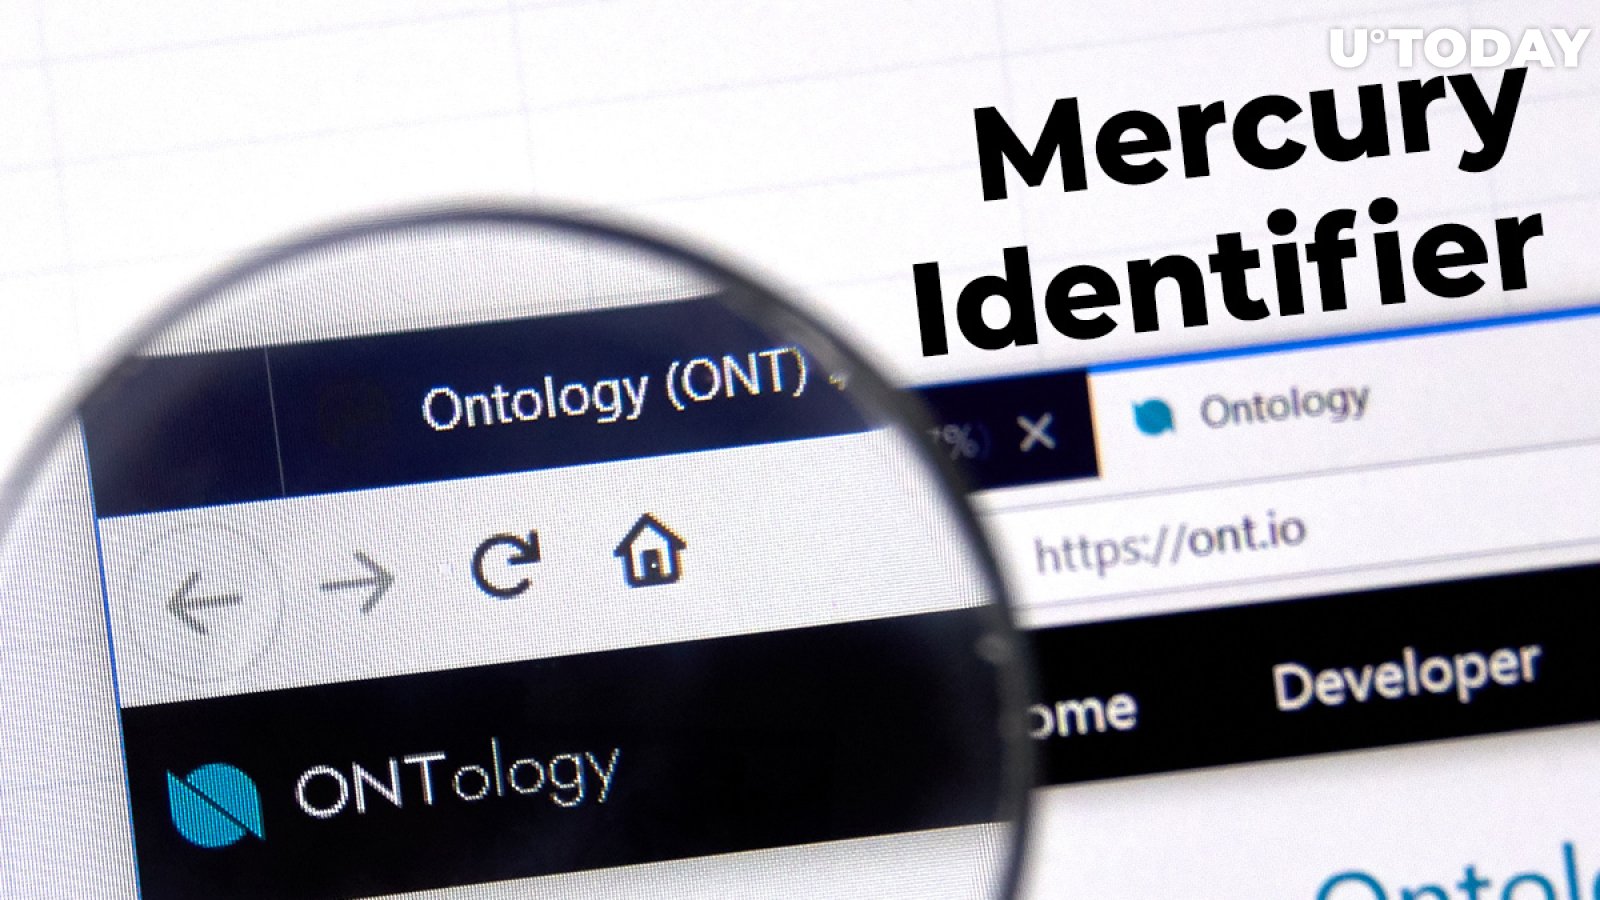 Ontology Launches Mercury Identifier to Improve Its Decentralized Identity Product